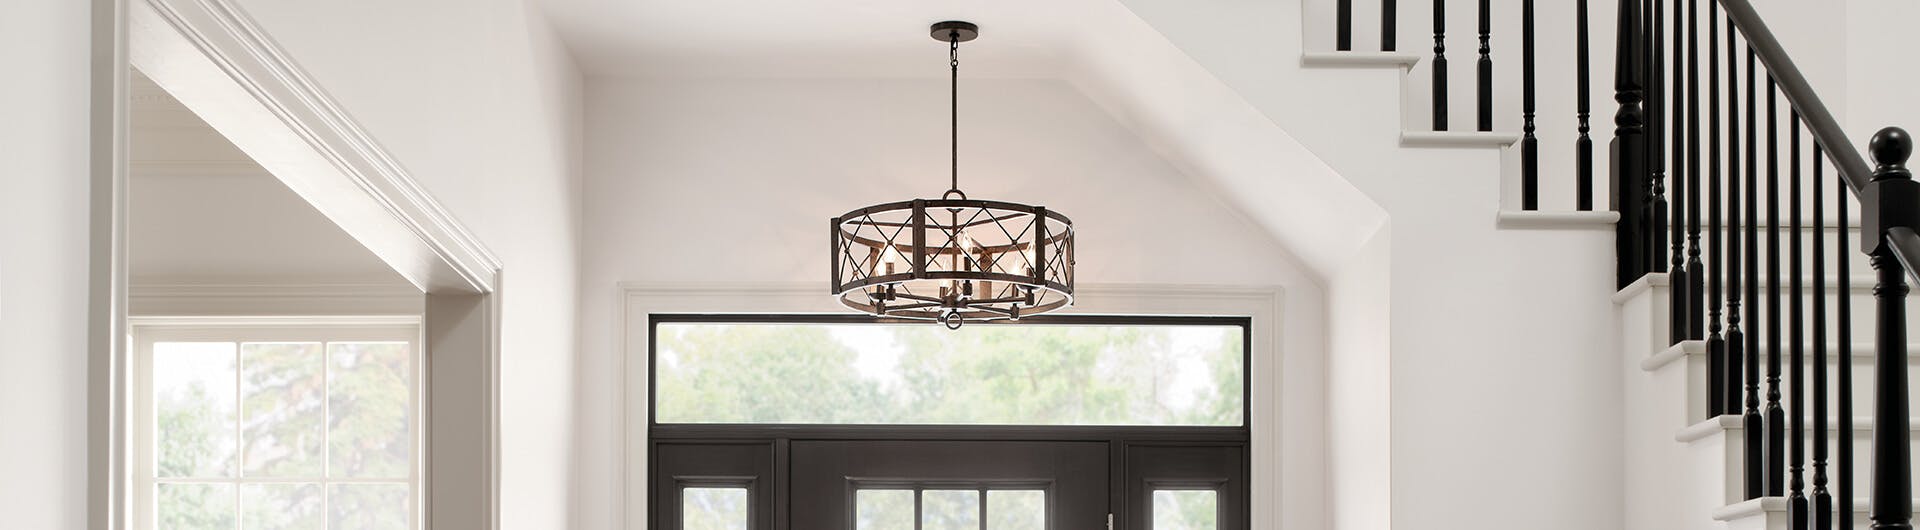 Daytime scene of a foyer with an Arborwood chandelier lit above the front door